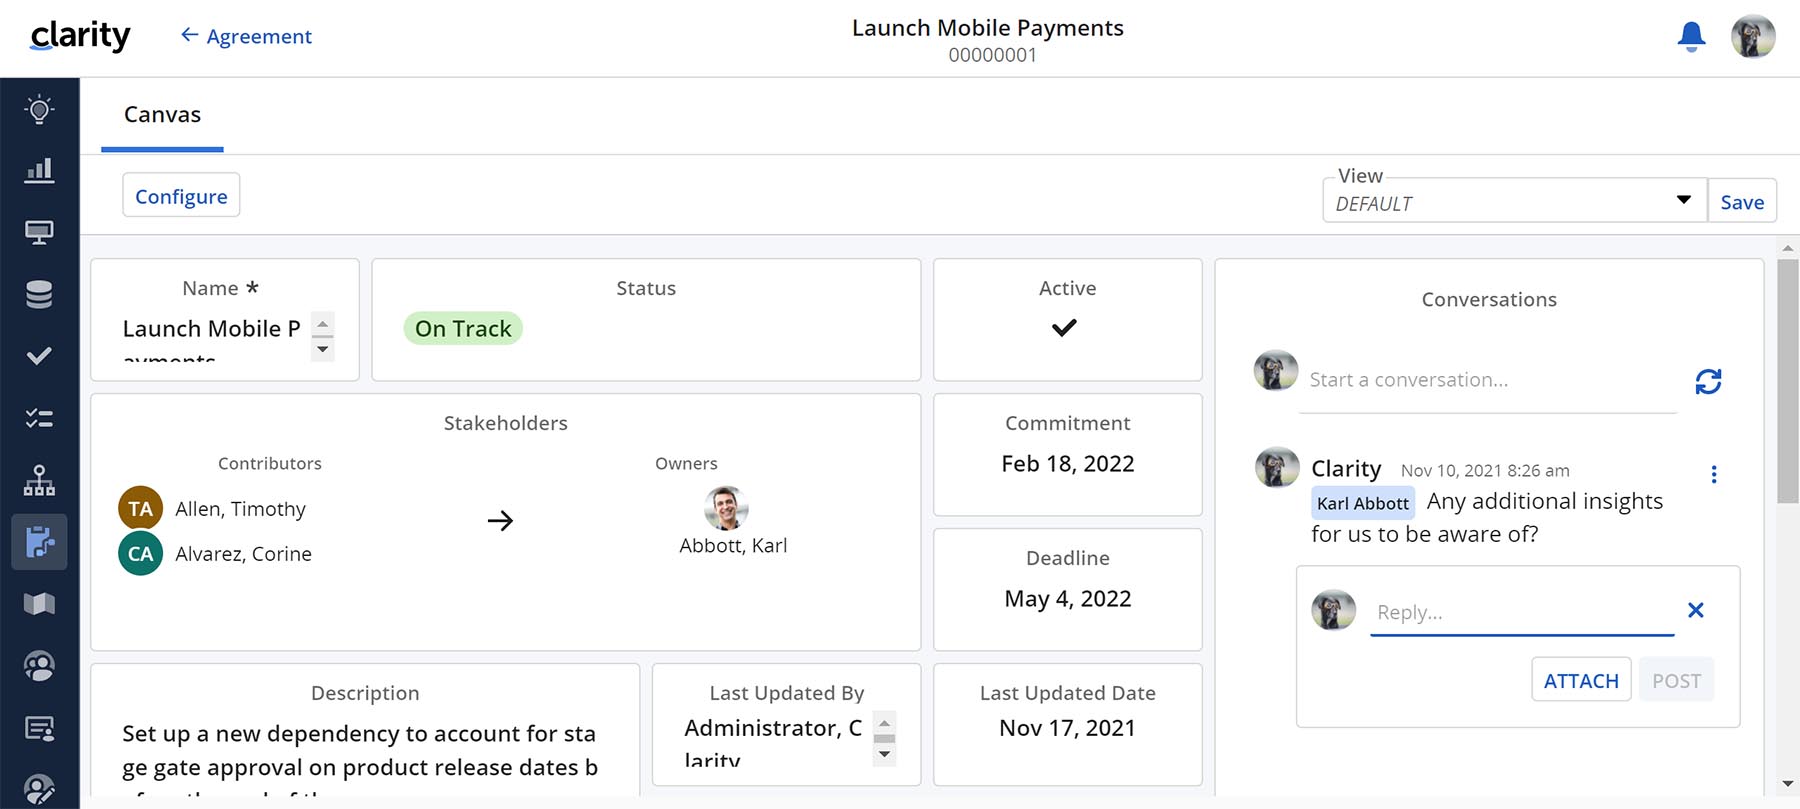 Using Clarity 16.0, you can now add configurable Business Agreements that include conversations, owners, status, and more.